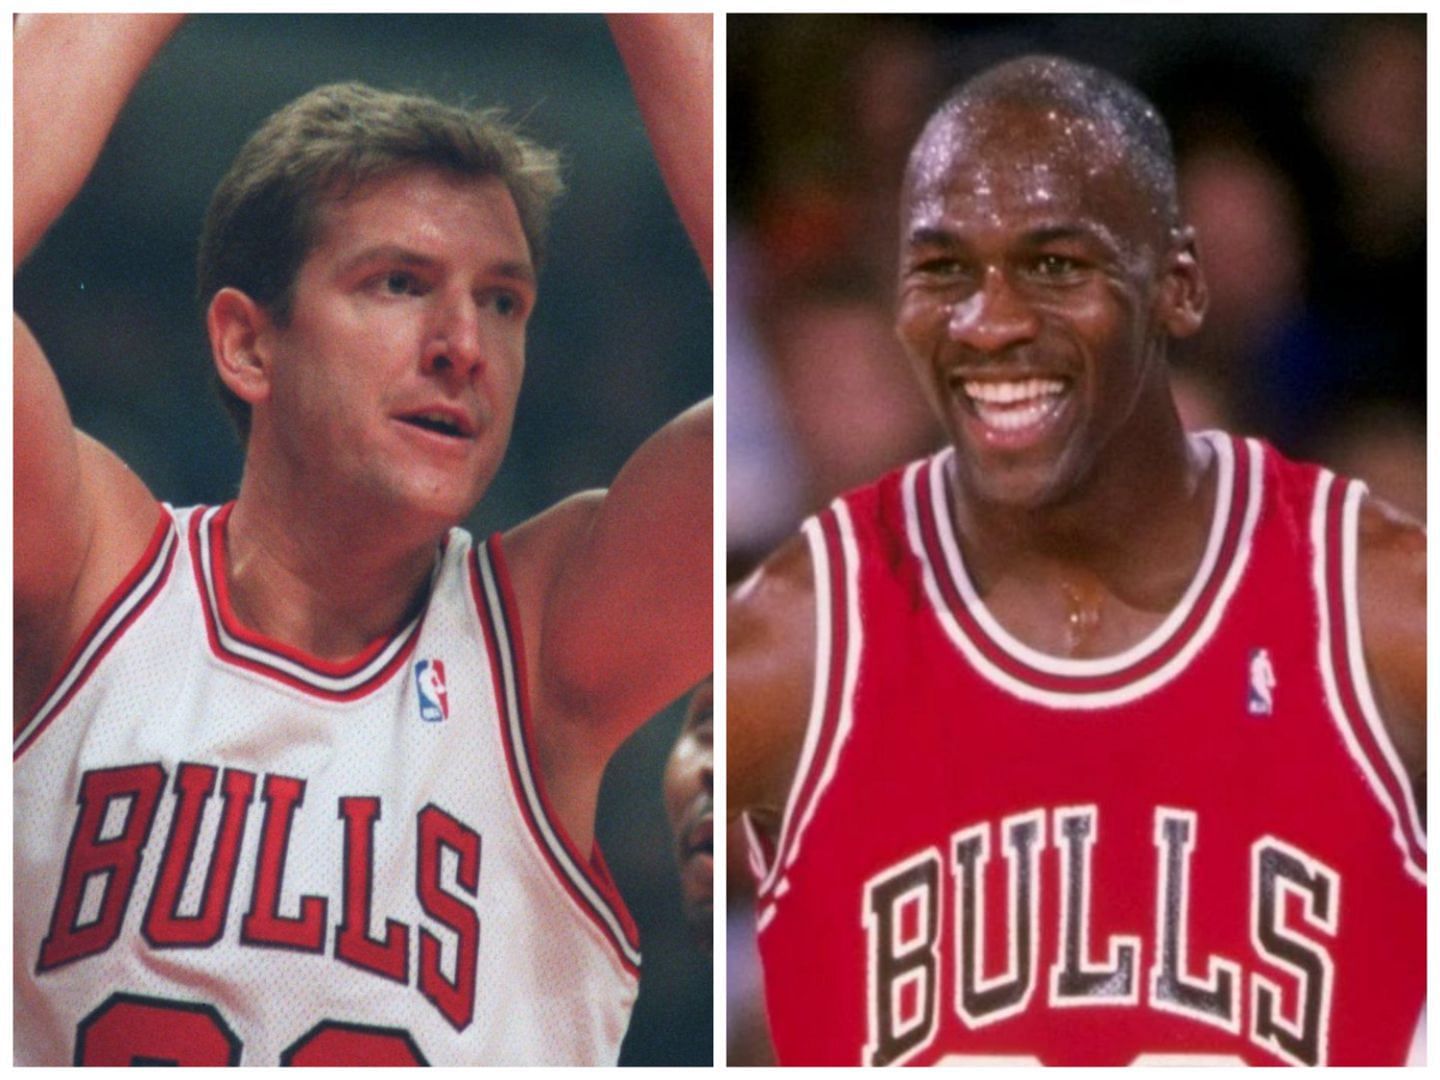 Will Perdue and Michael Jordan of the Chicago Bullls